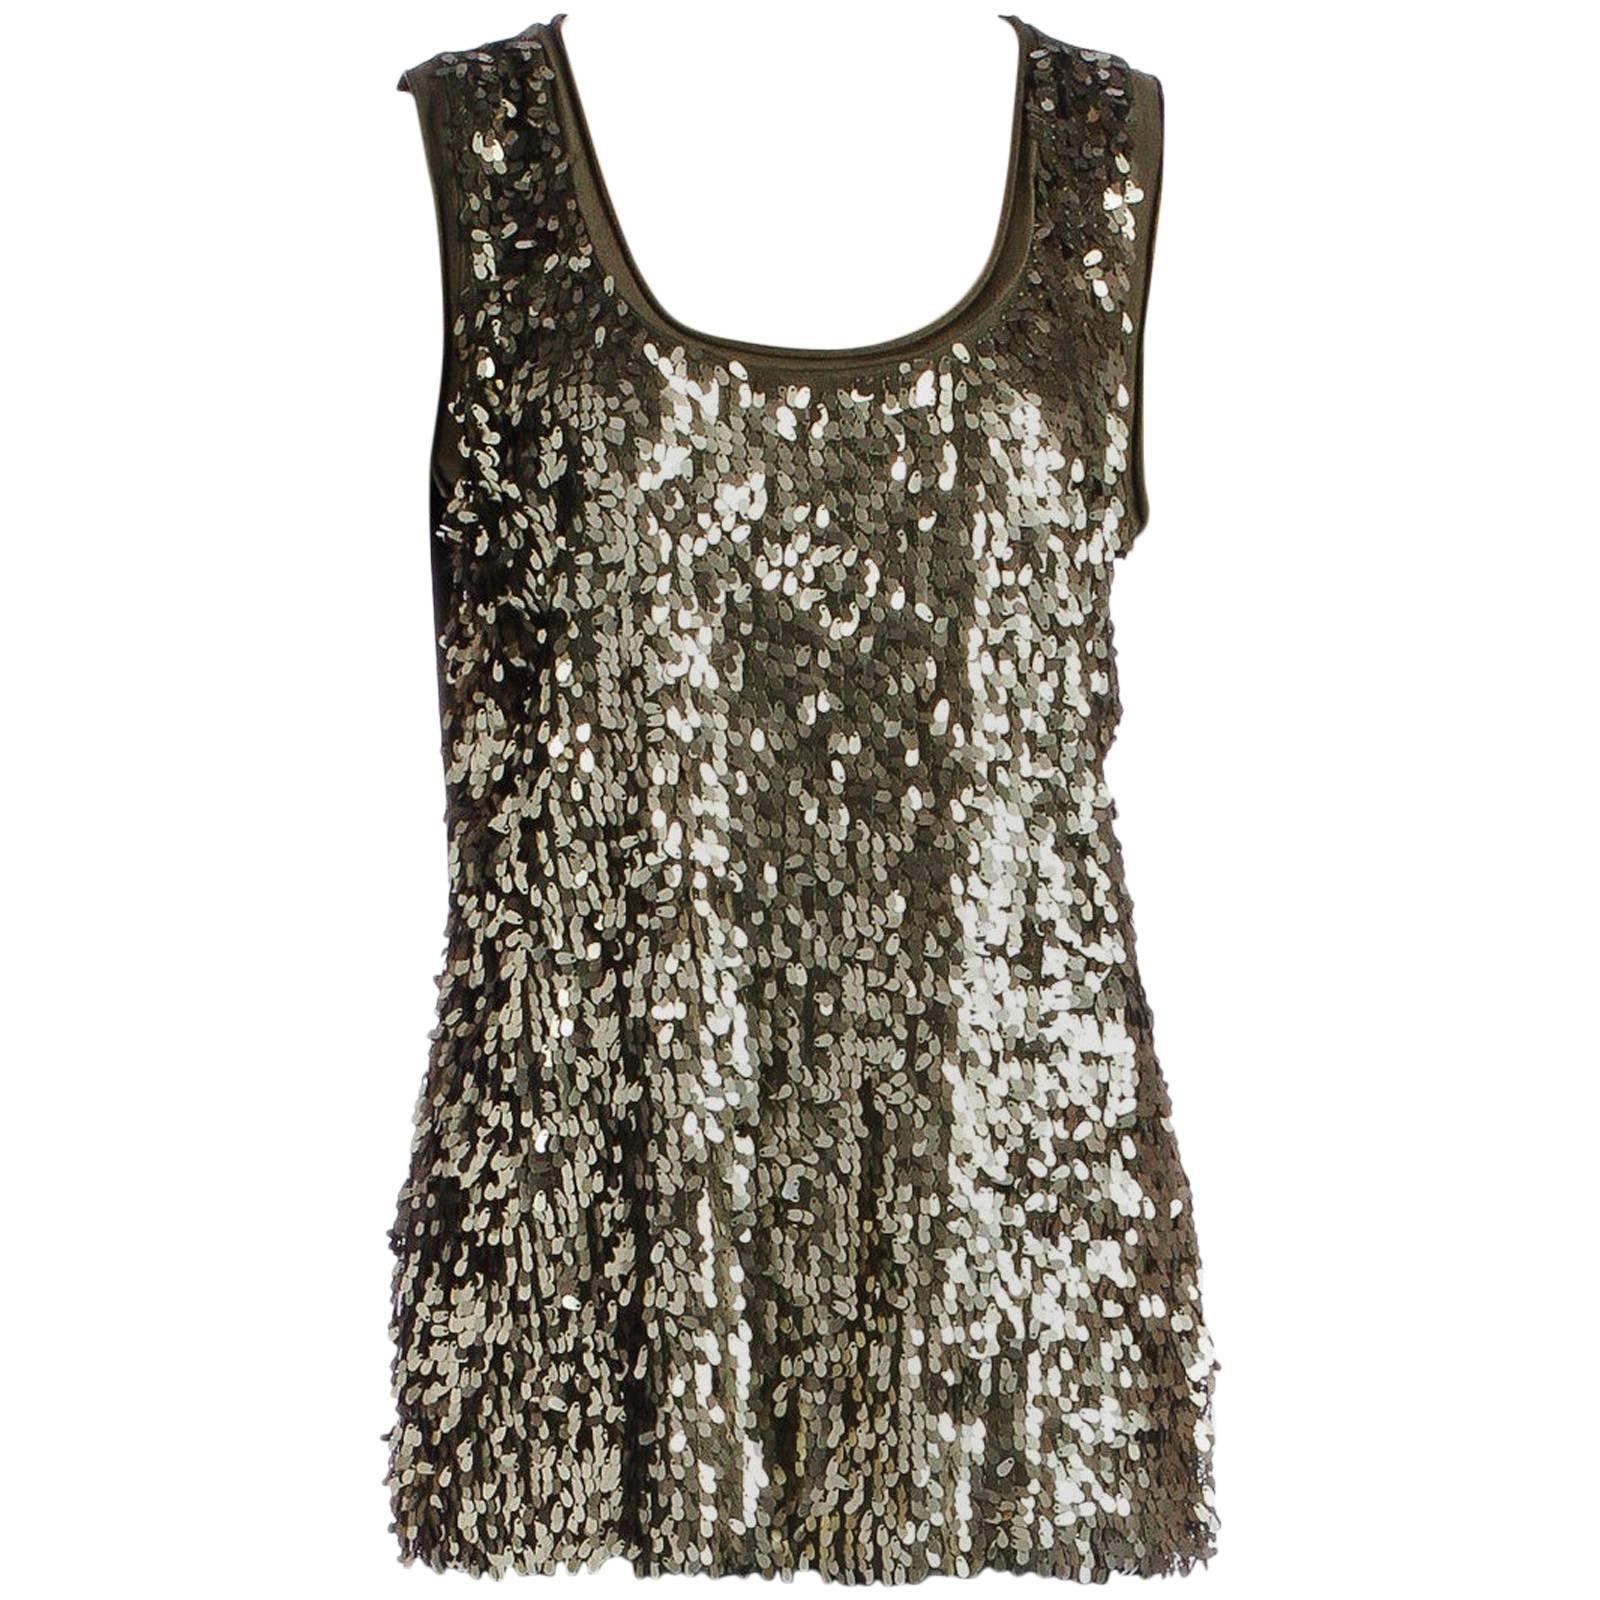 Calvin Klein Green Sleeveless Sequin Top (Size L) For Sale